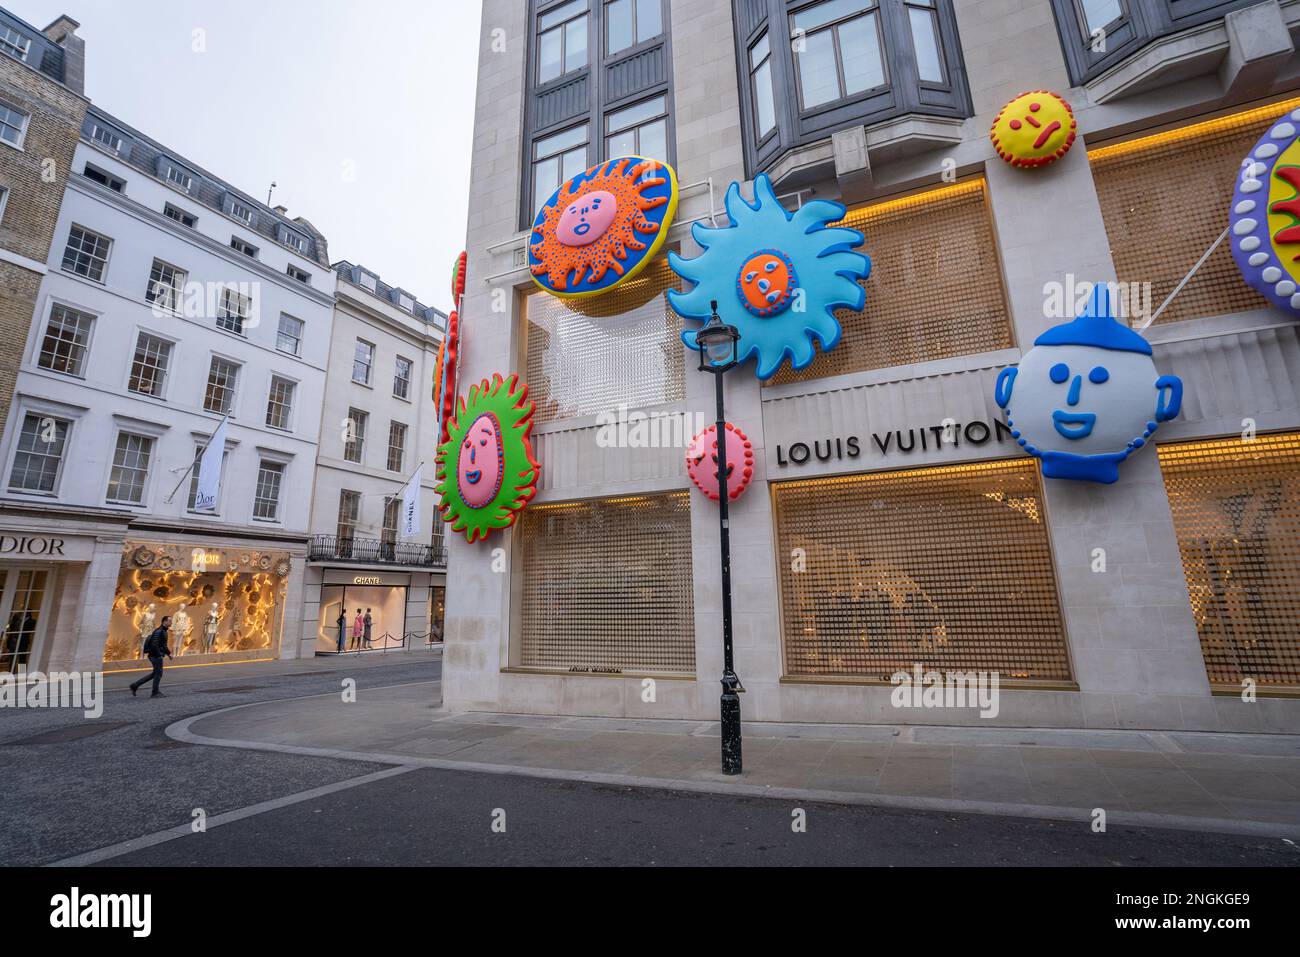 London, UK. 18 February 2023. The exterior of the flagship Louis Vuitton  store on Bond Street